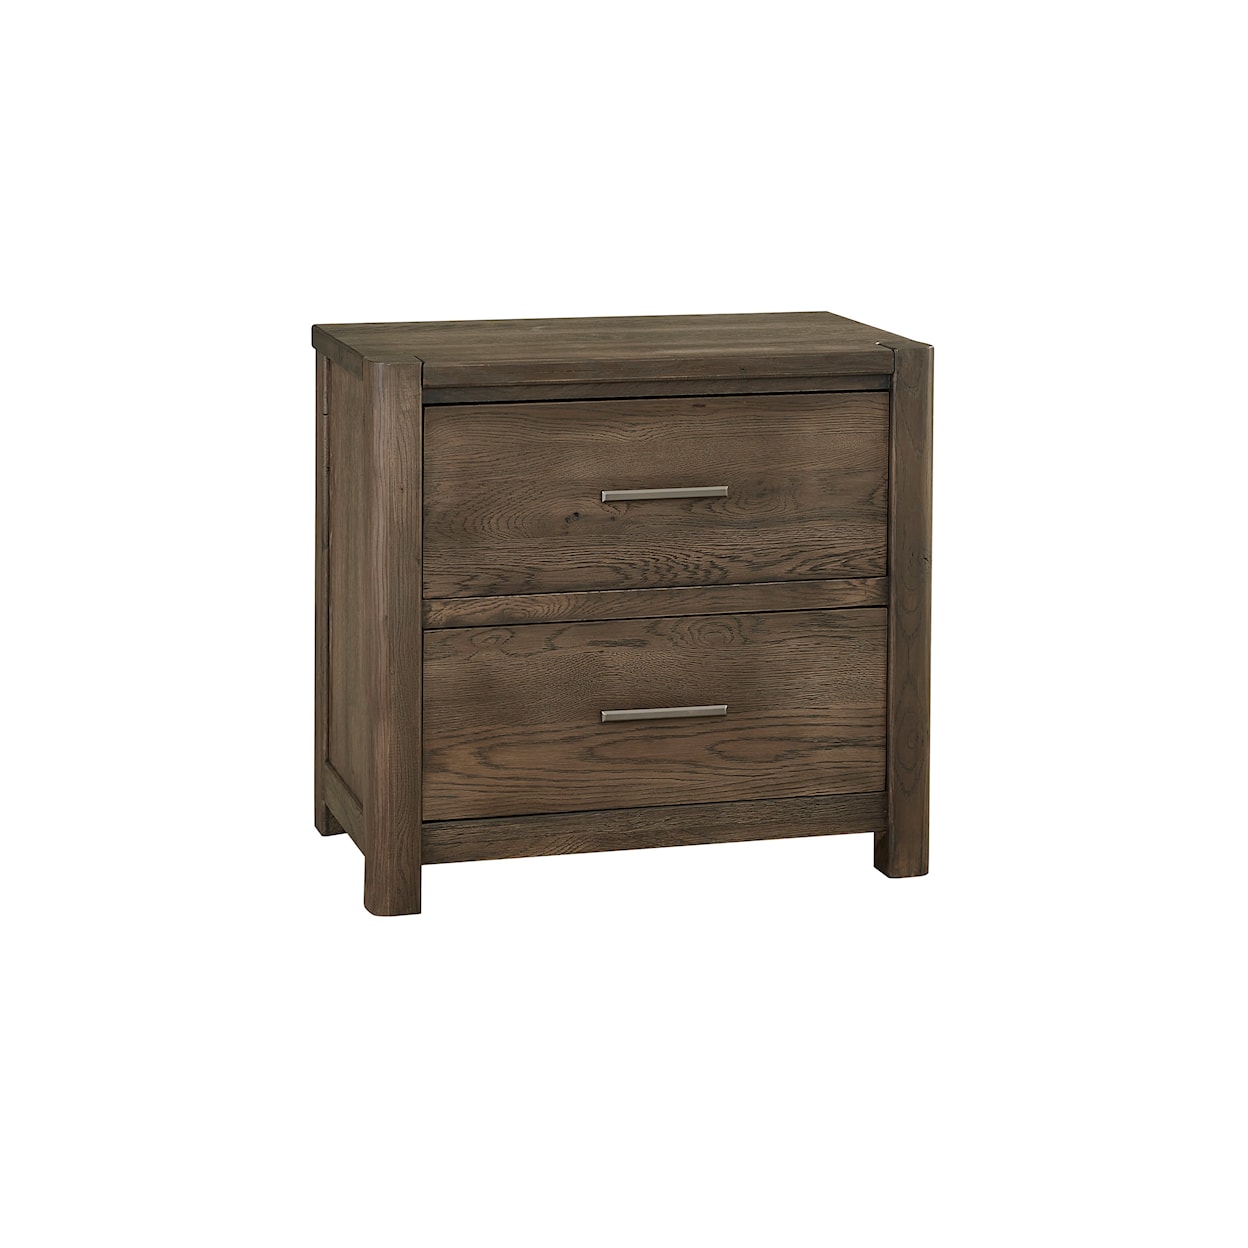 Laurel Mercantile Co. Crafted Oak 2-Drawer Nightstand